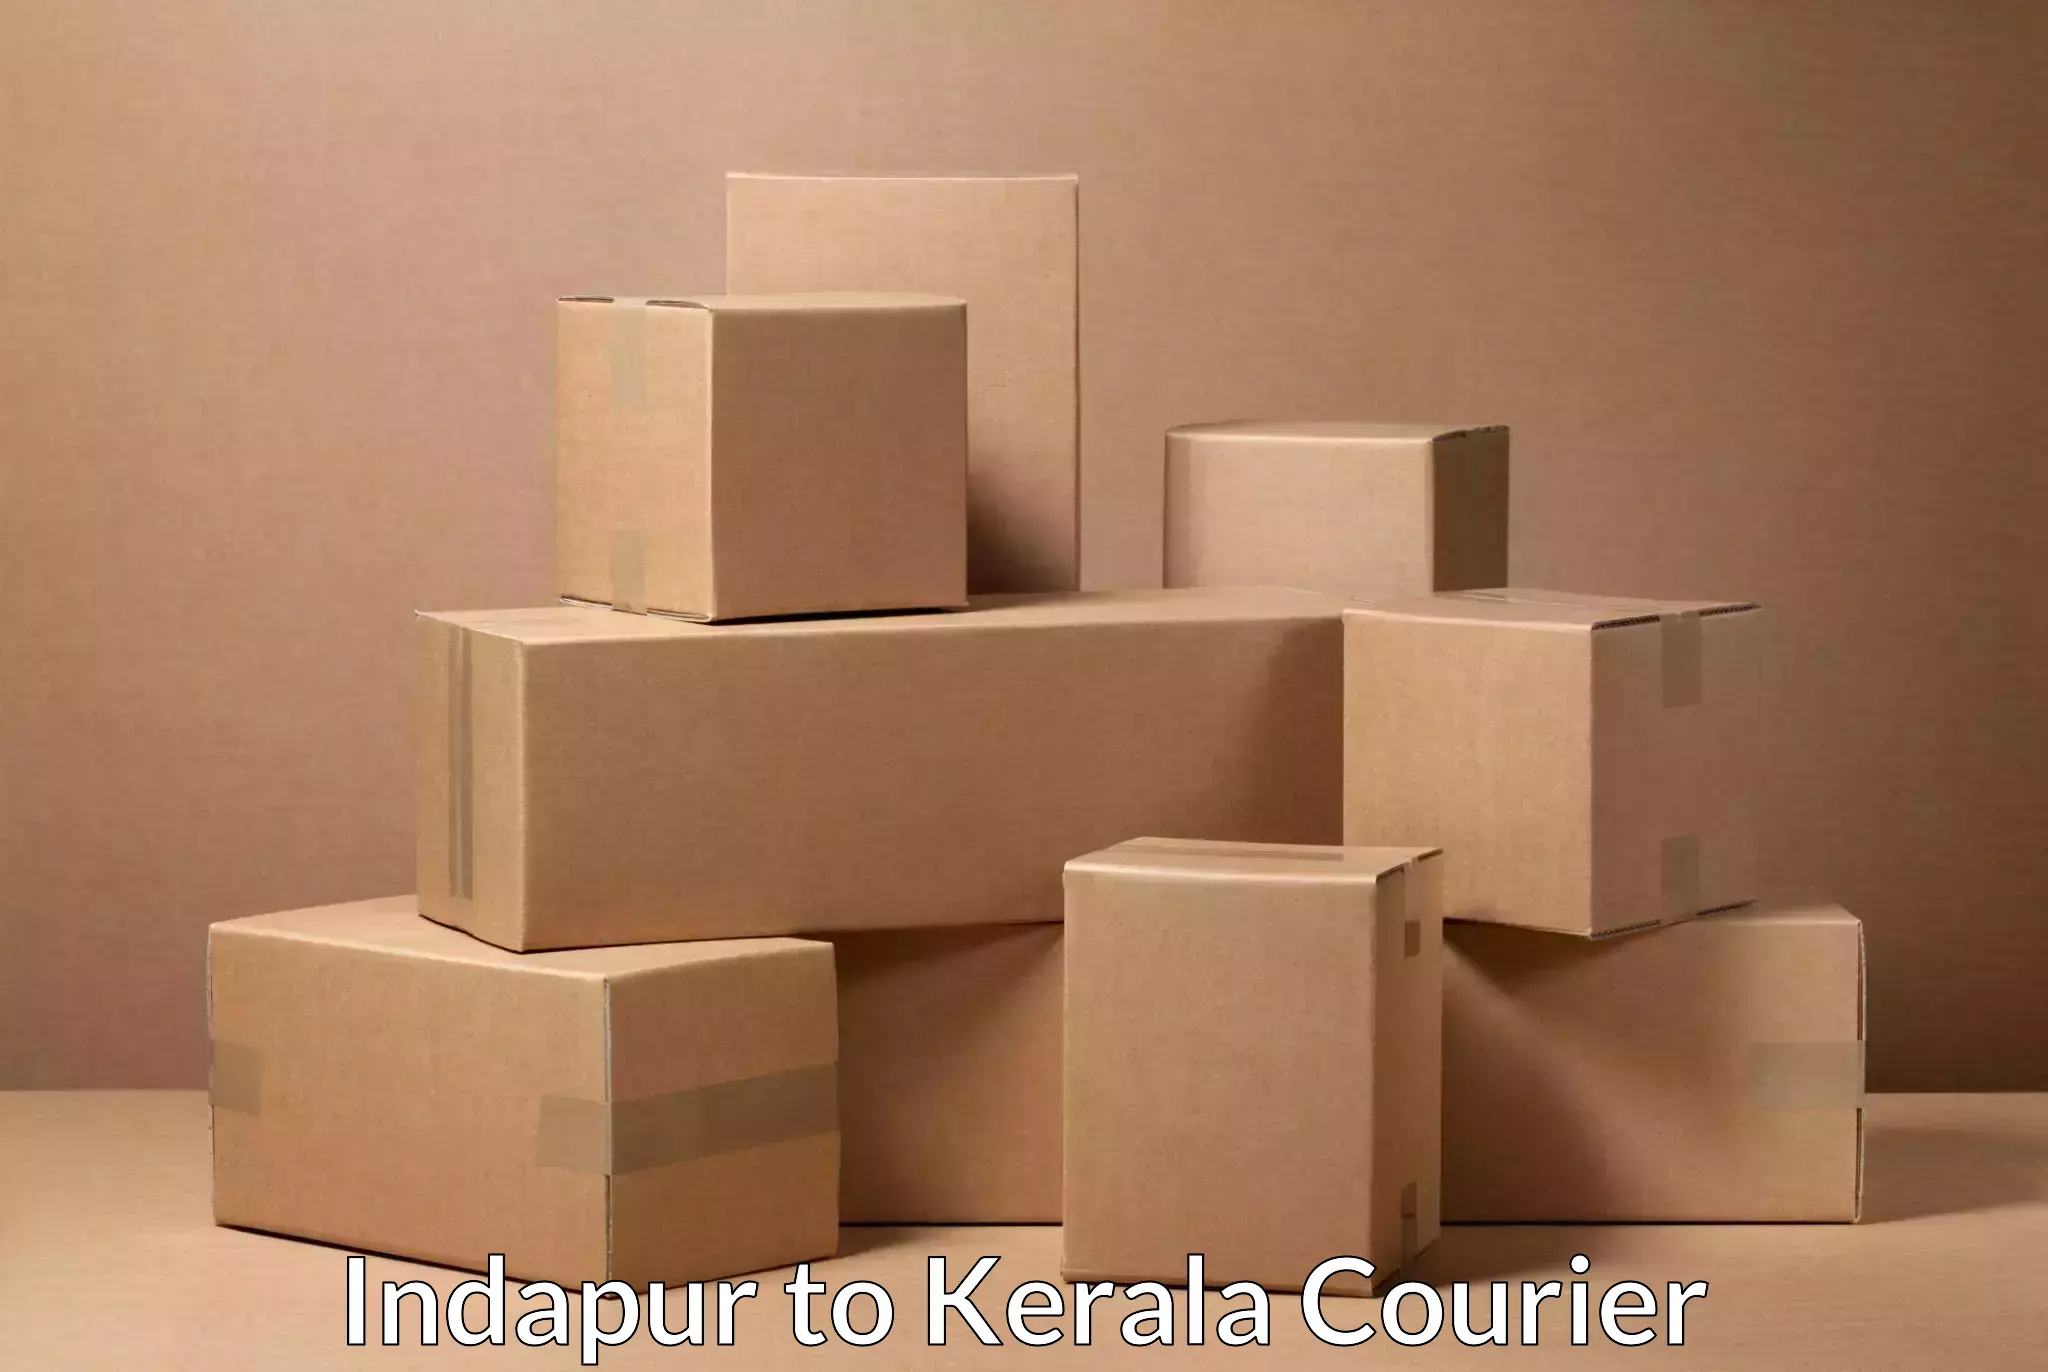 Global shipping networks Indapur to Pathanamthitta